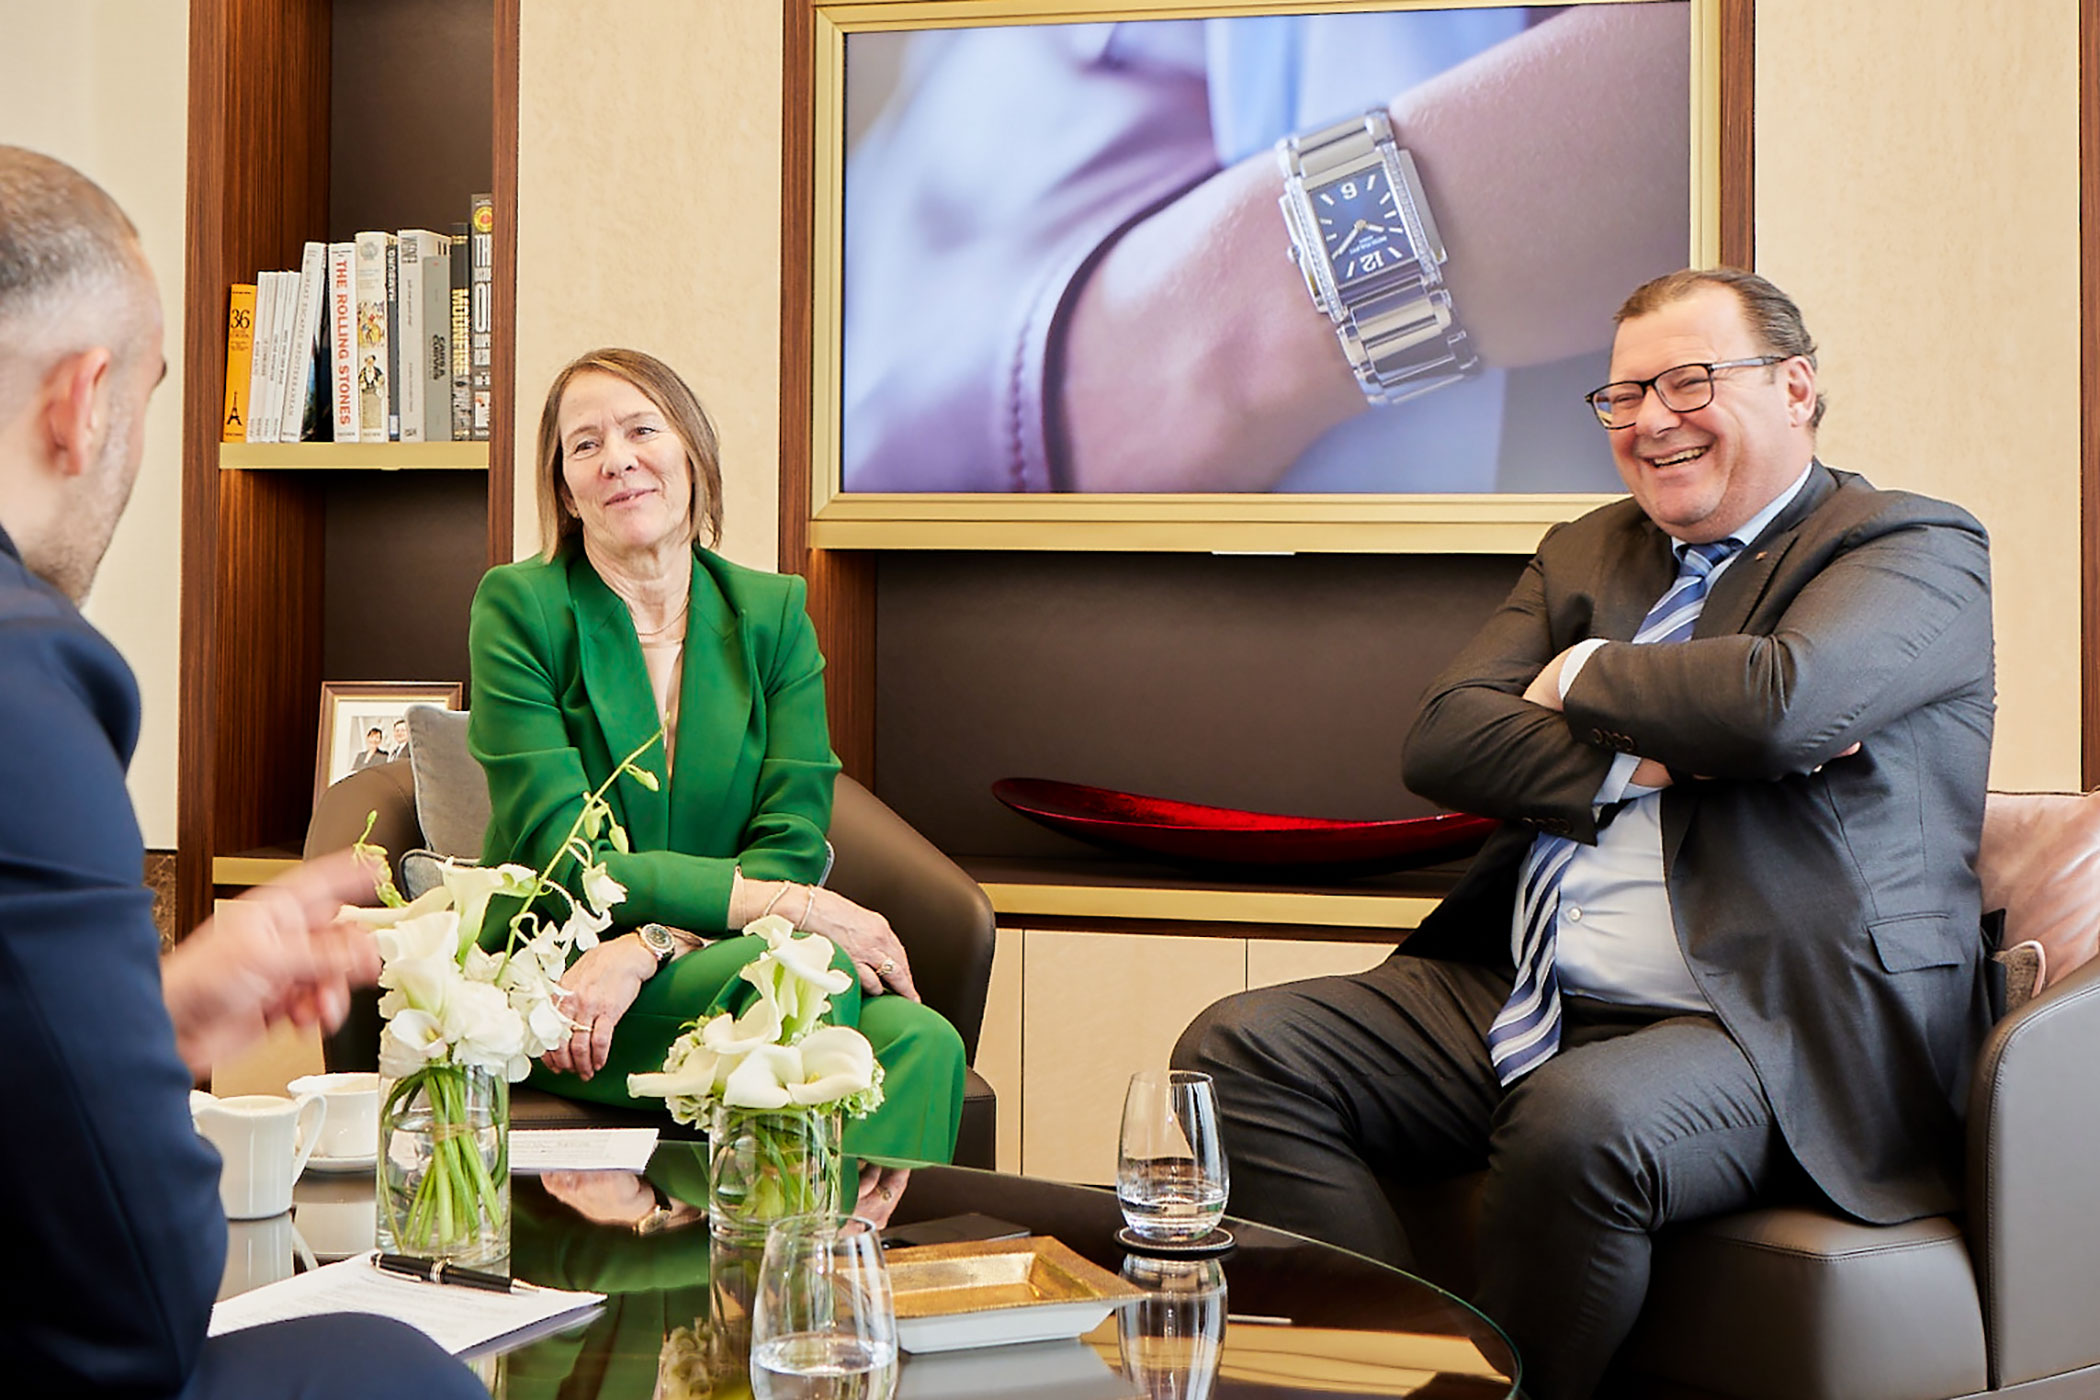 interview-with-patek-philippe-president-thierry-stern-and-wempe-ceo-kim-eva-wempe